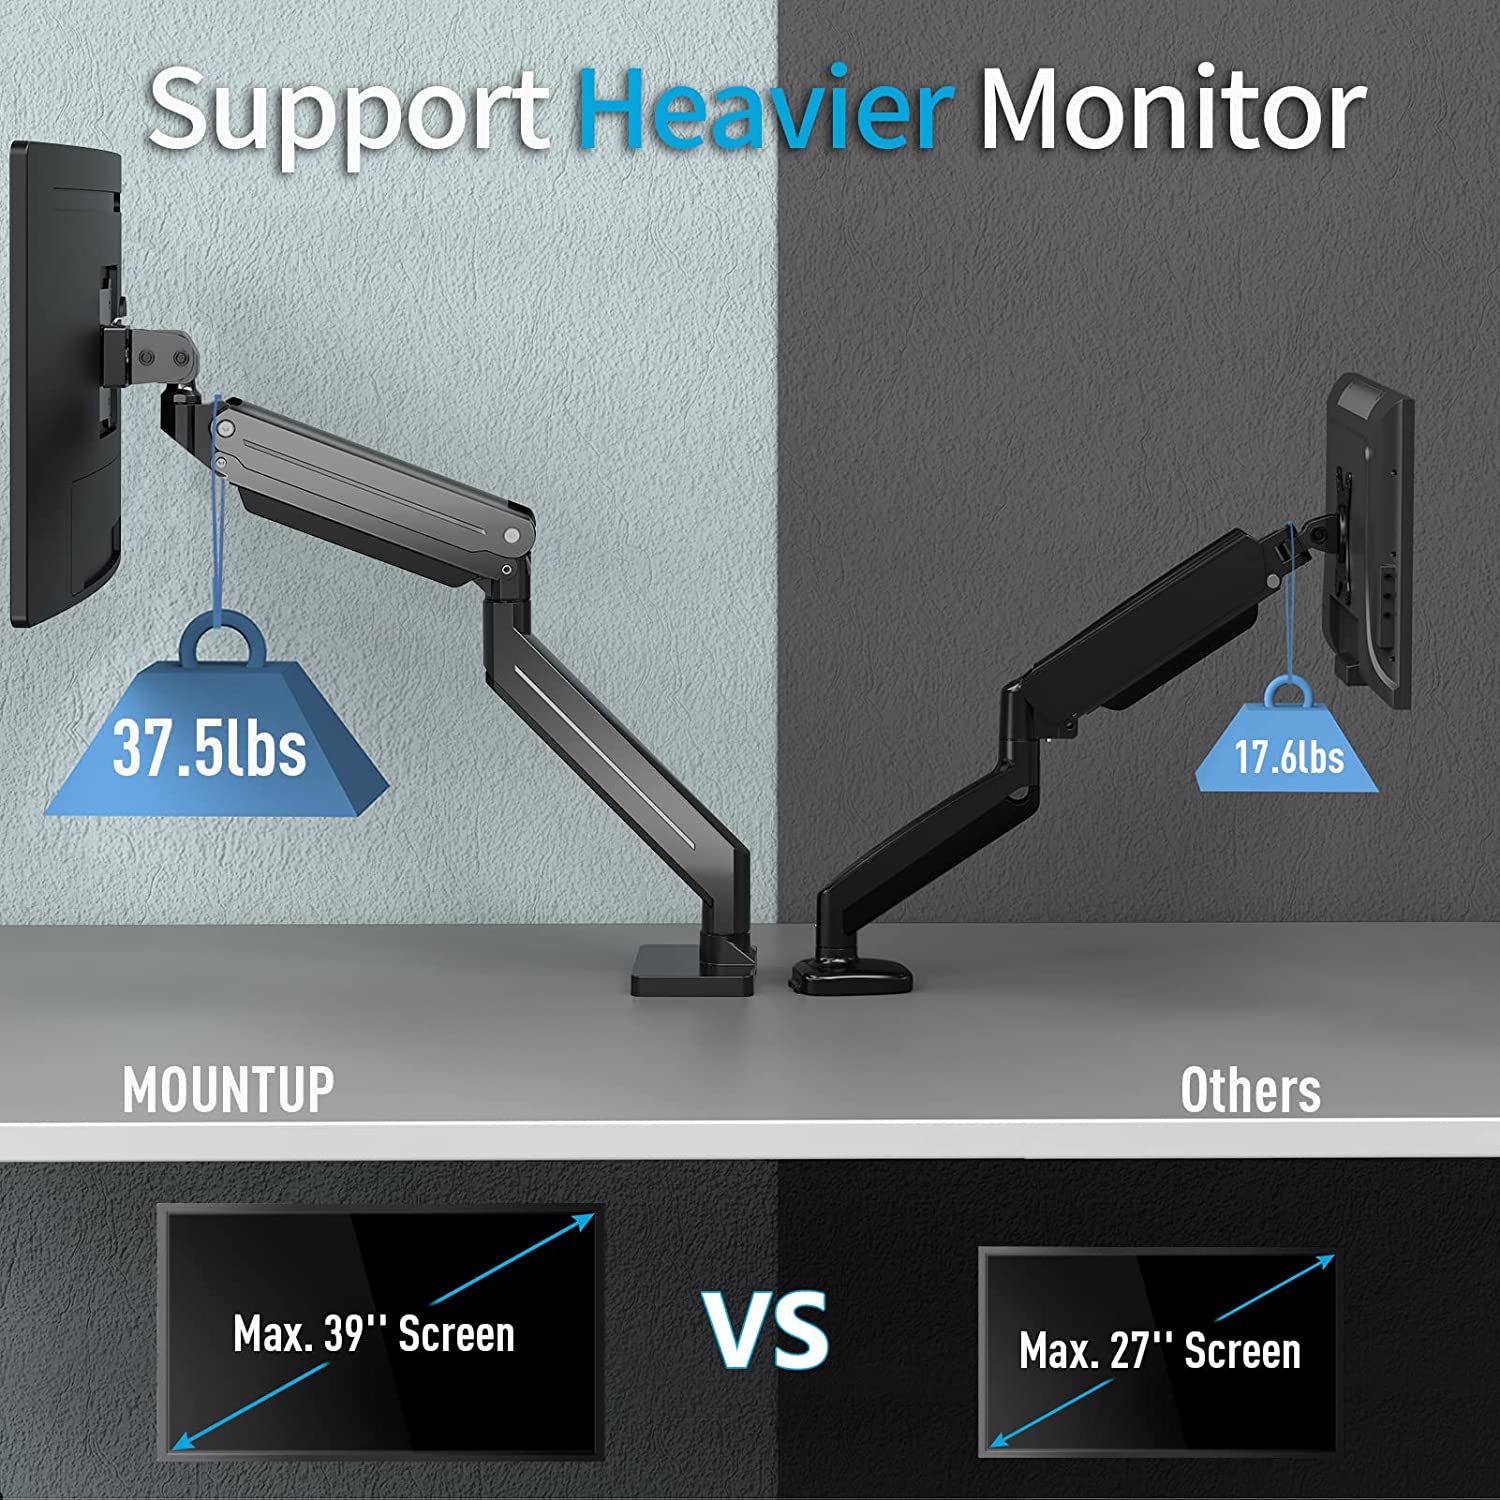 single monitor mount supports a monitor up to 37.5 lbs.